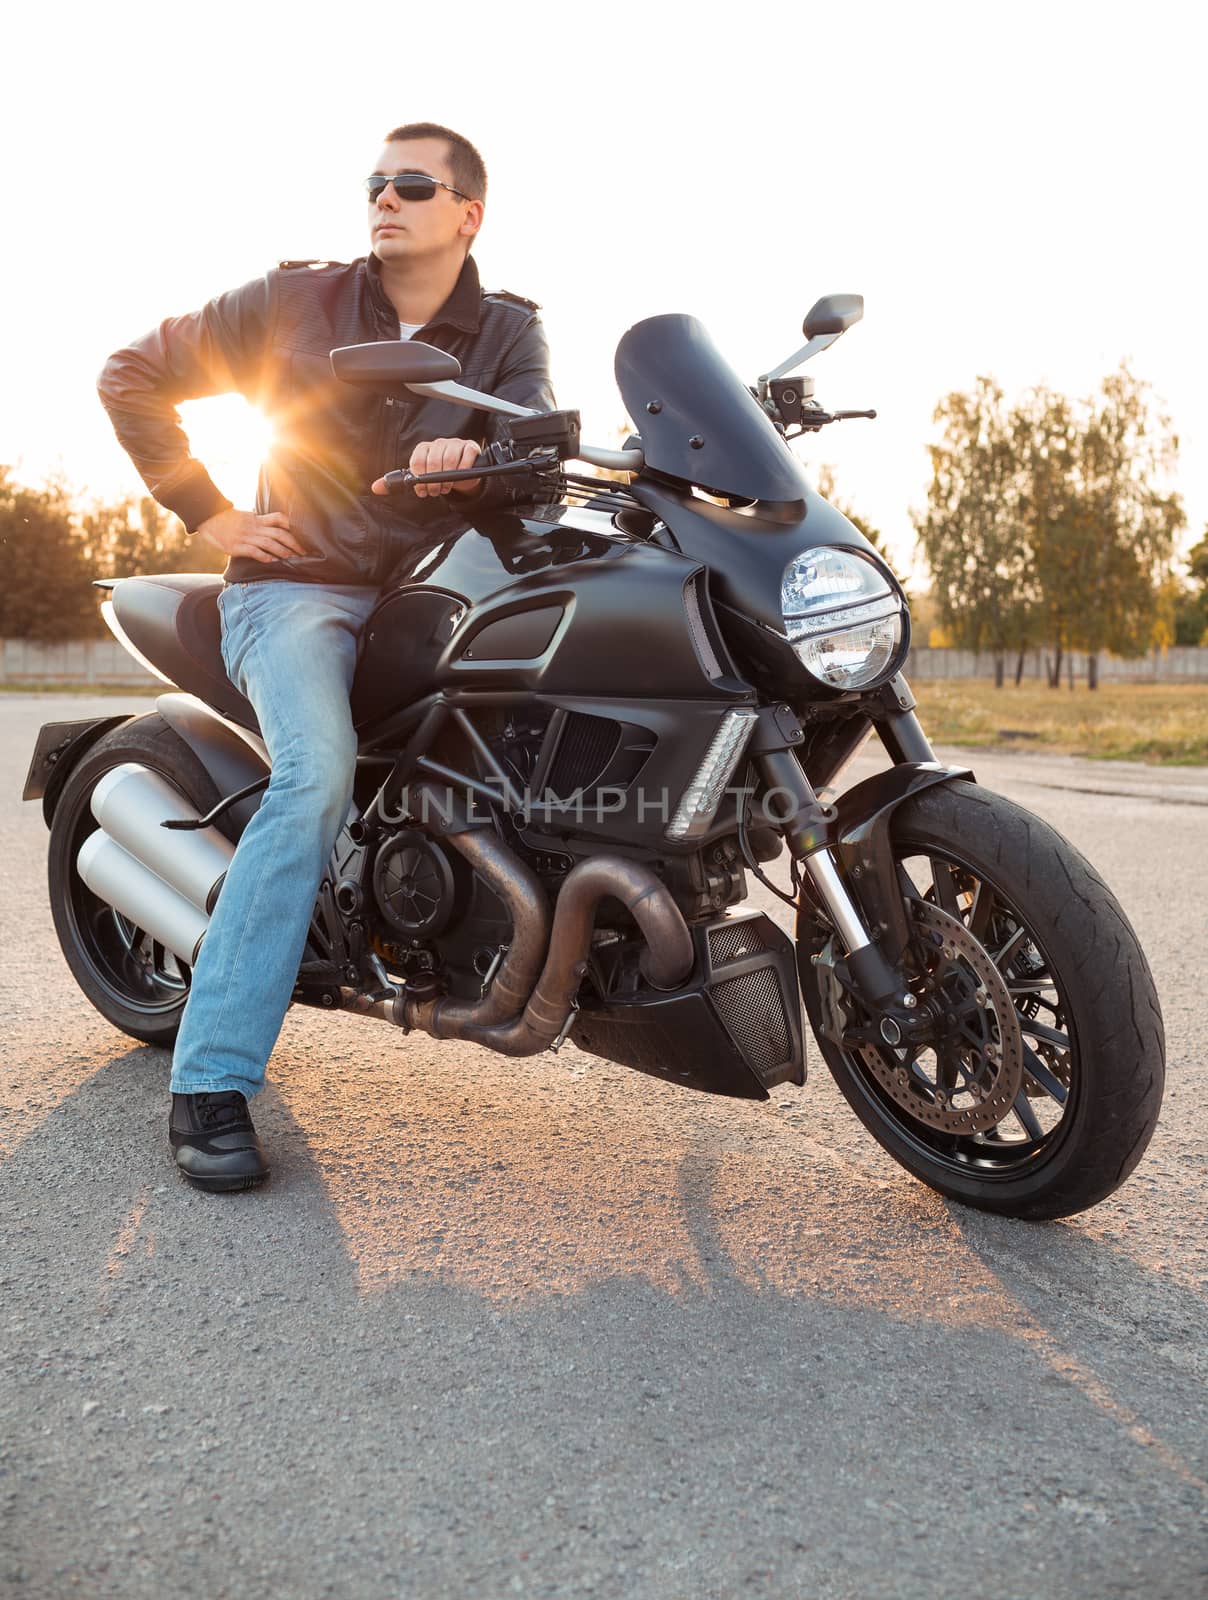 Biker man wearing a leather jacket and sunglasses sitting on his motorcycle outdoors